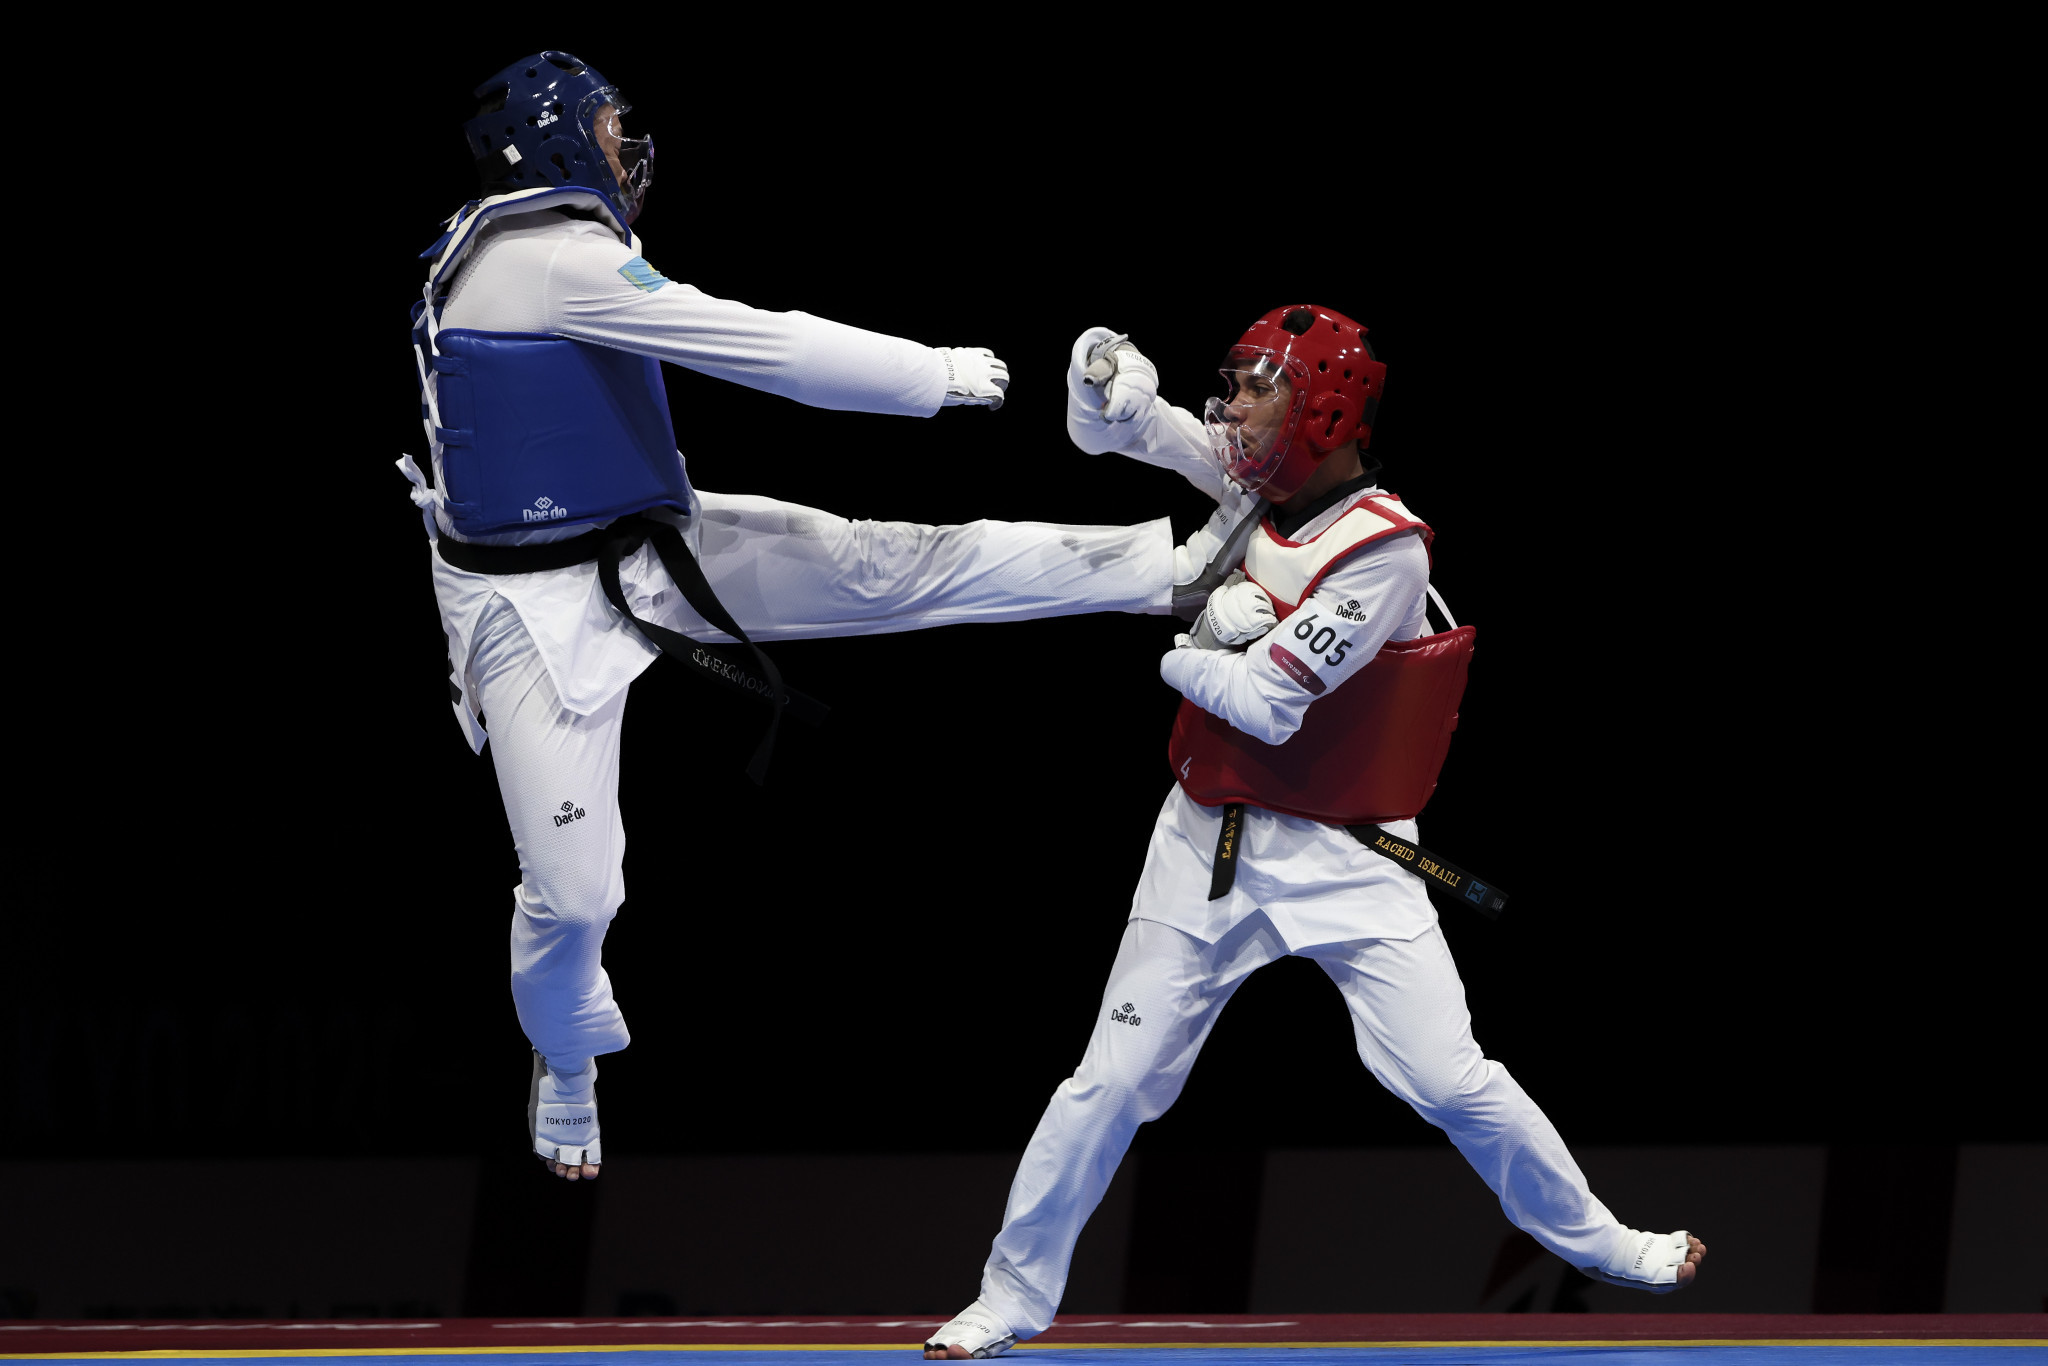 World Para Taekwondo releases survey to help boost classification knowledge